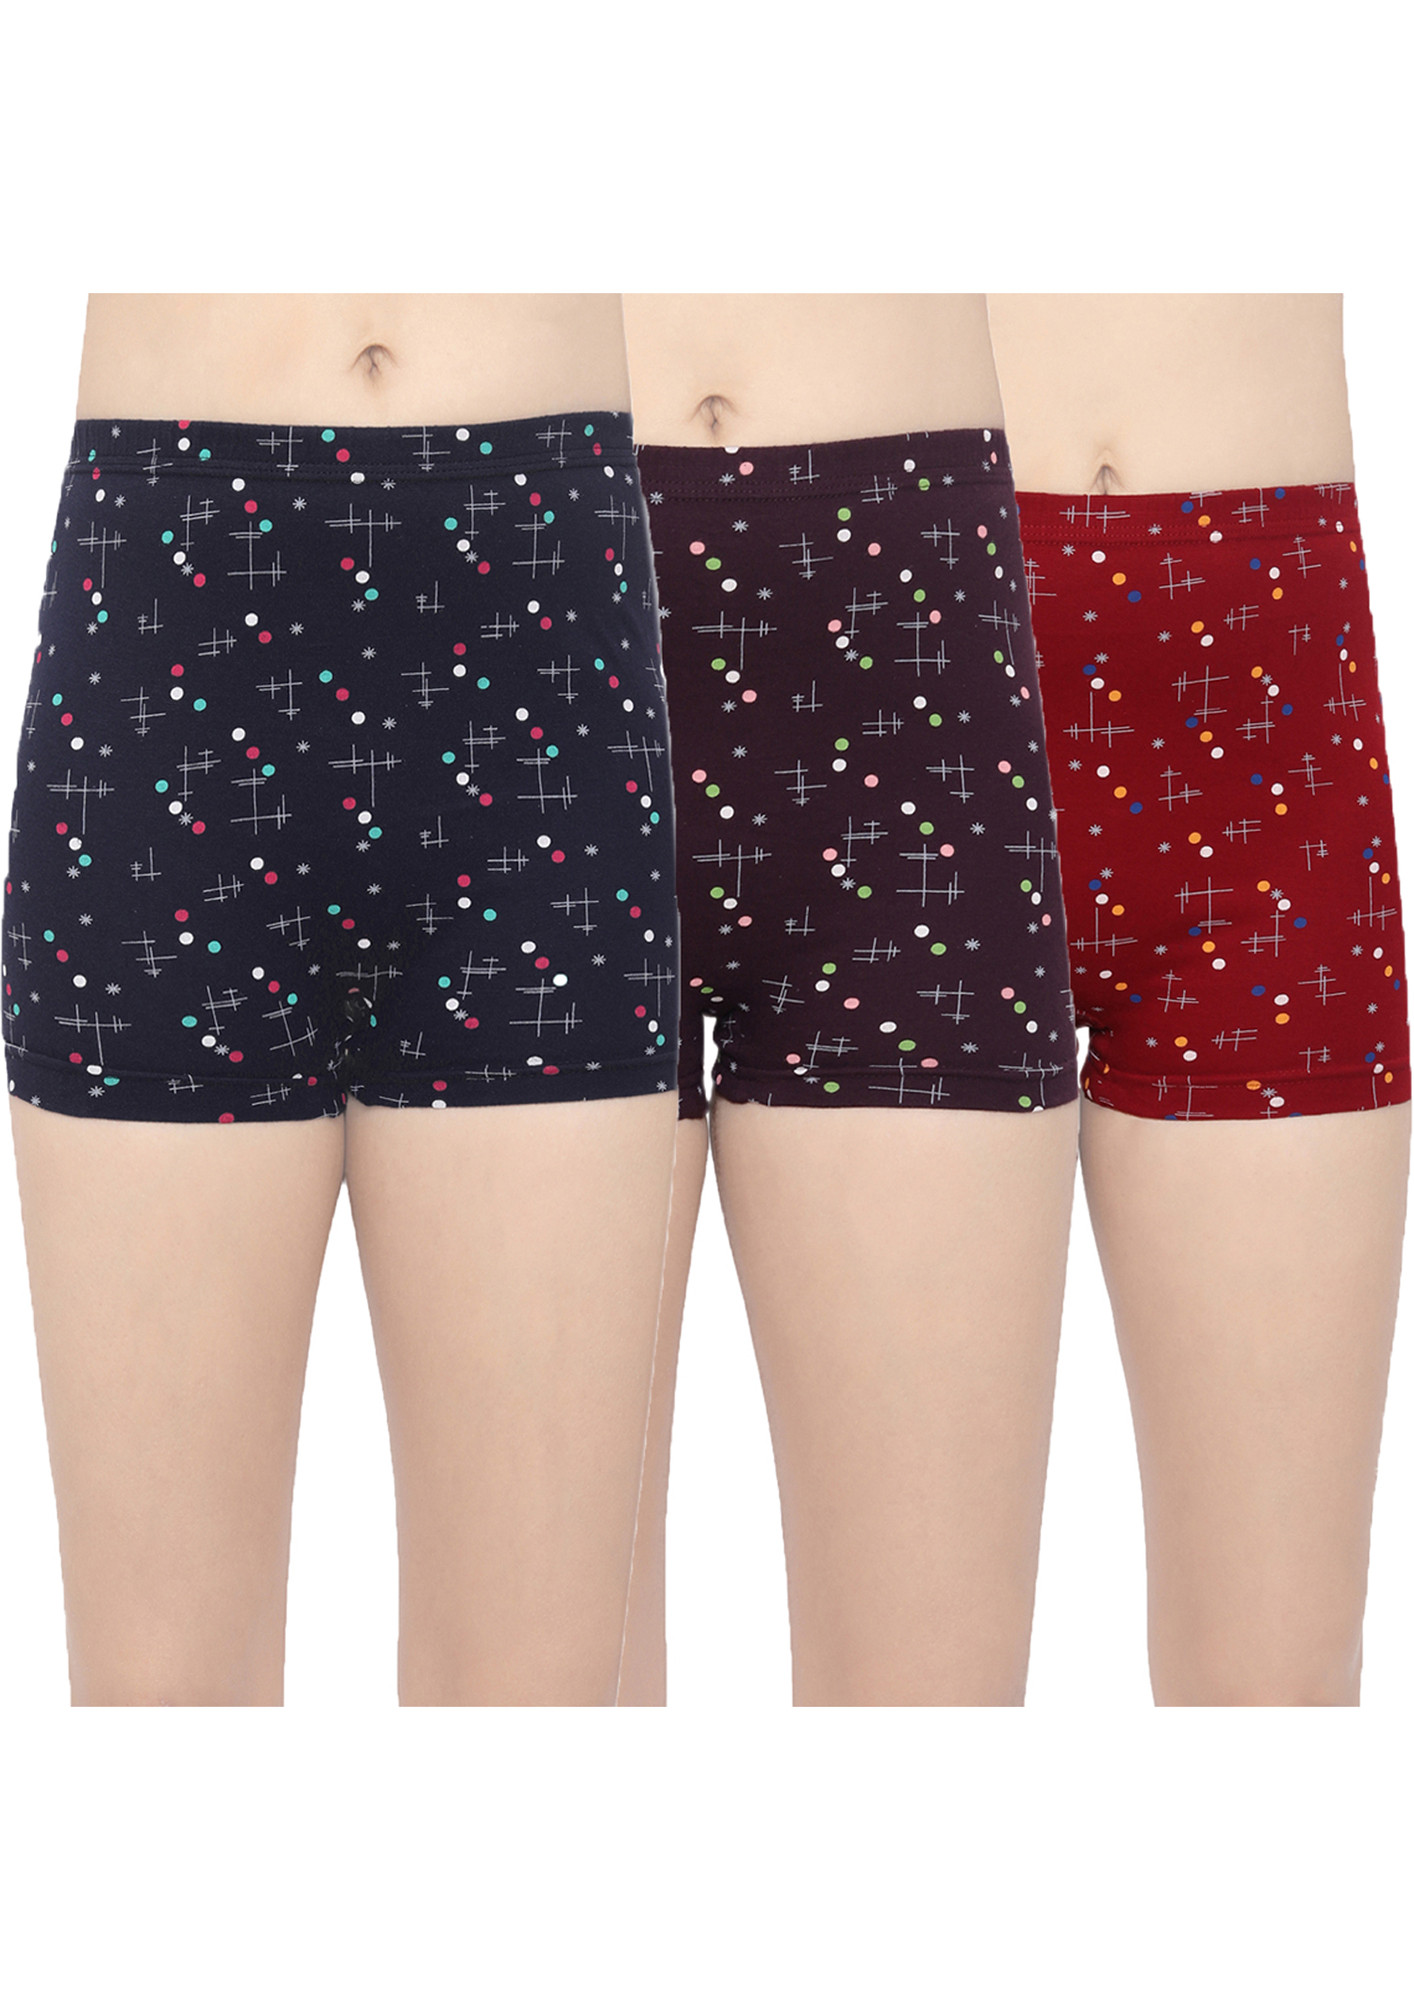 Buy In Care Women Pack Of 3 Assorted Printed Pure Cotton Boy Shorts-ISLG-001  for Women Online in India